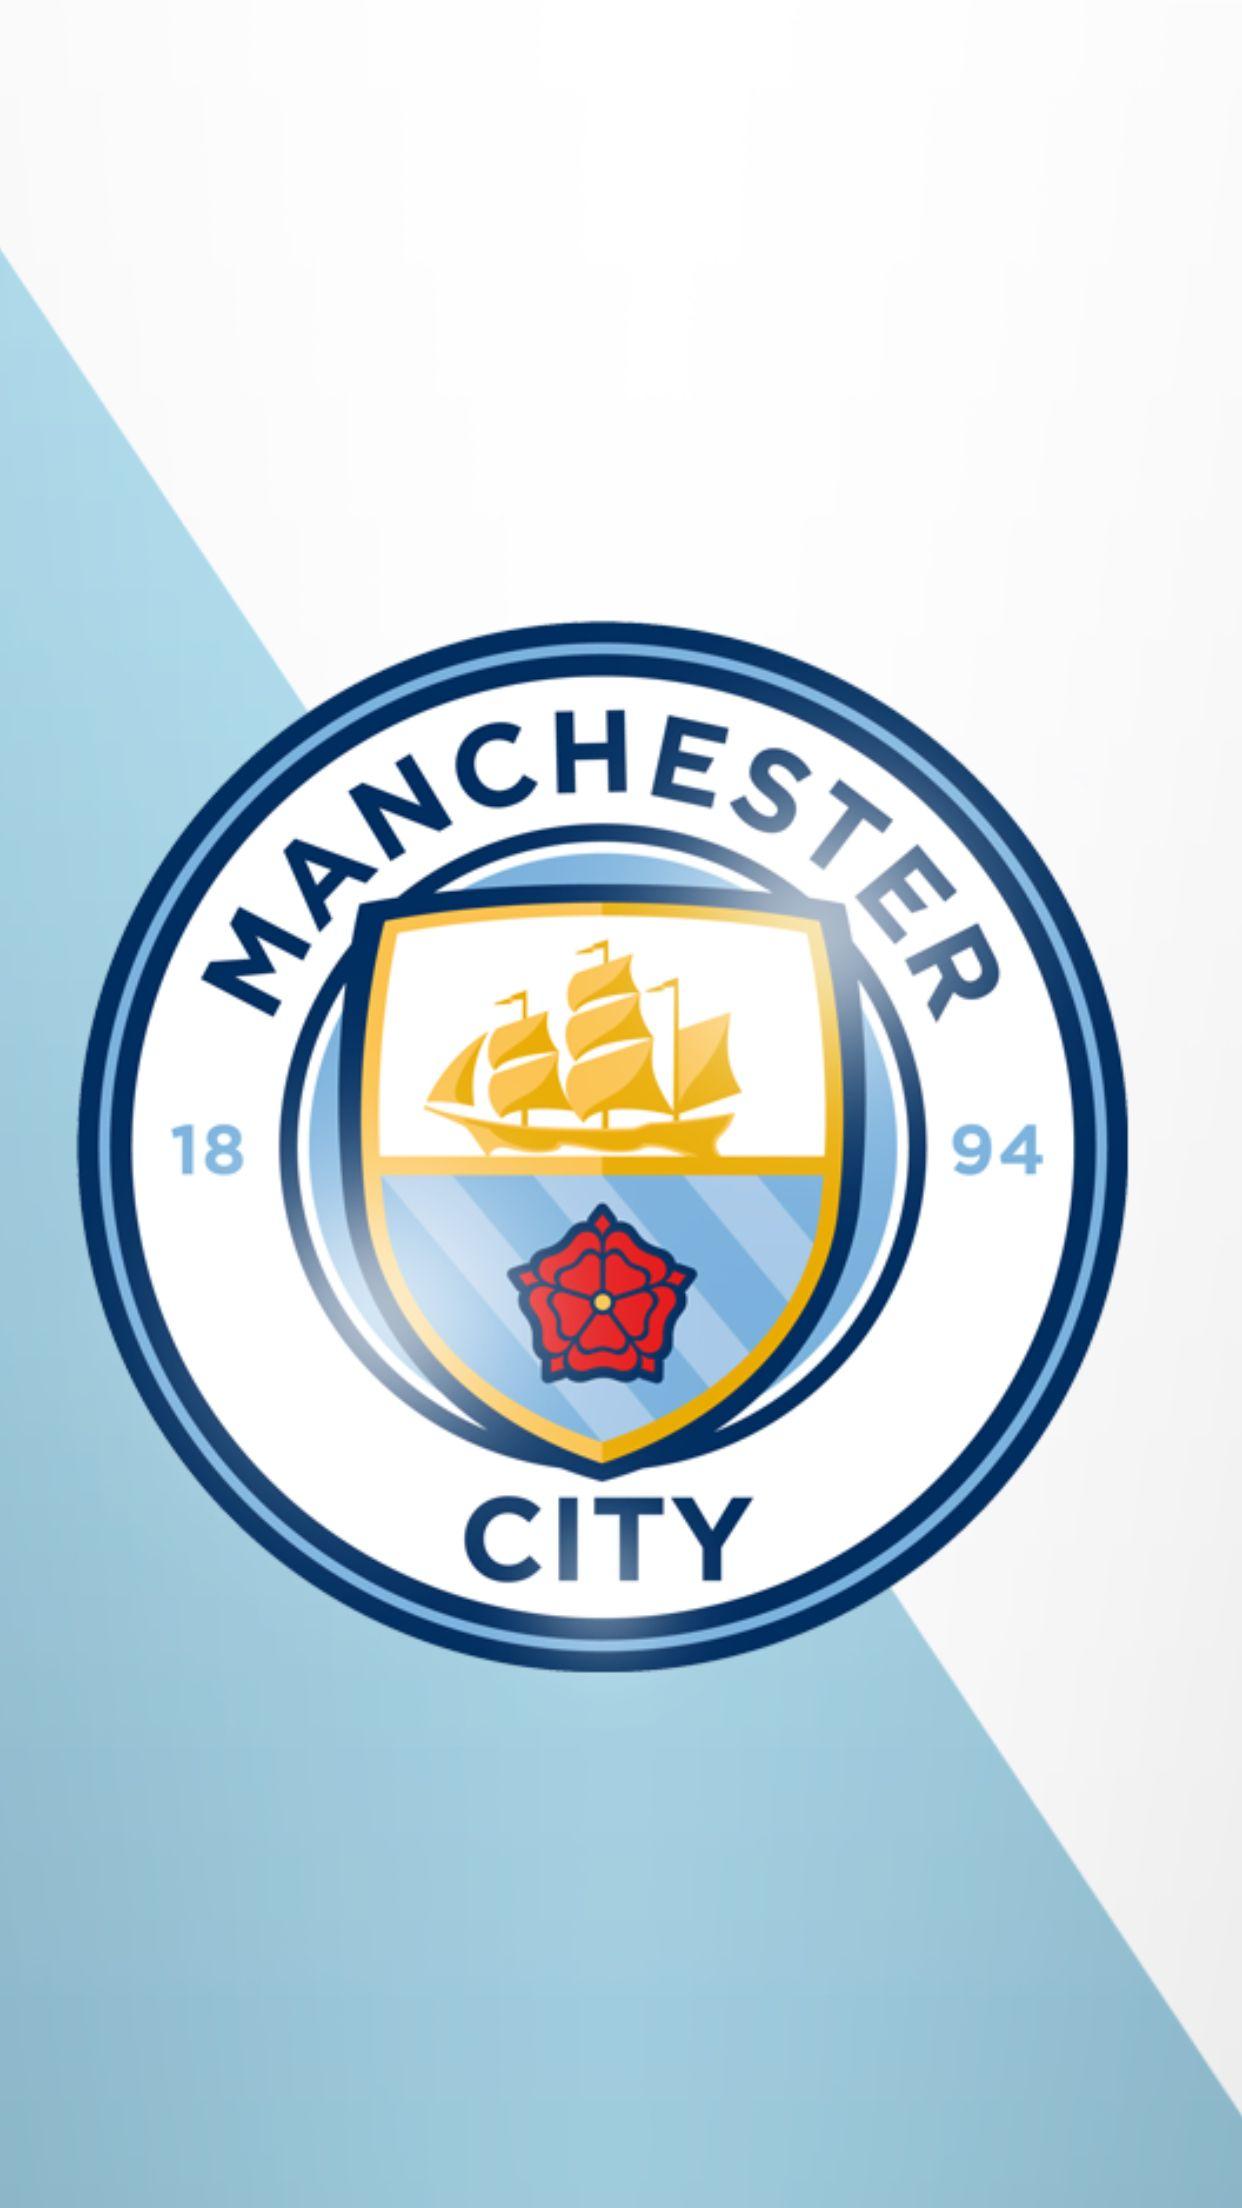 Manchester City FC  Wikipedia tiếng Việt